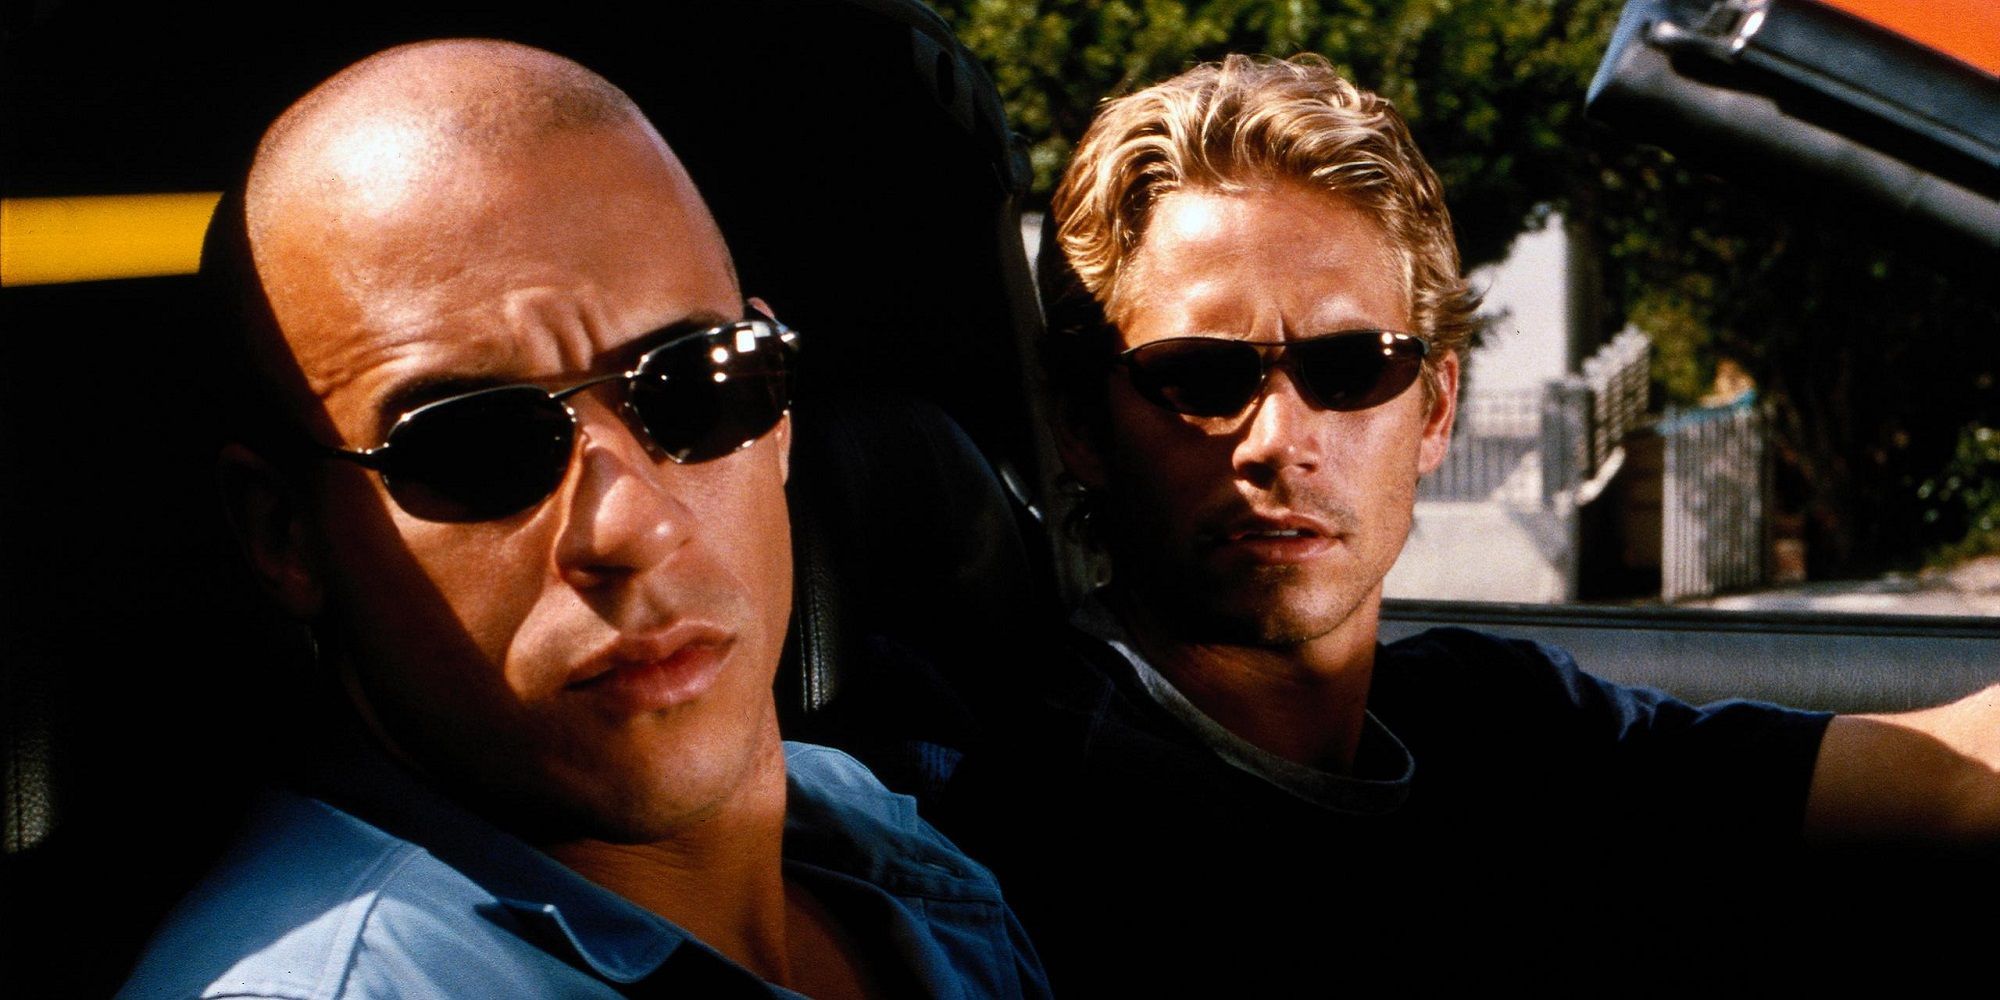 Dom and Brian wear shades and sit in a car